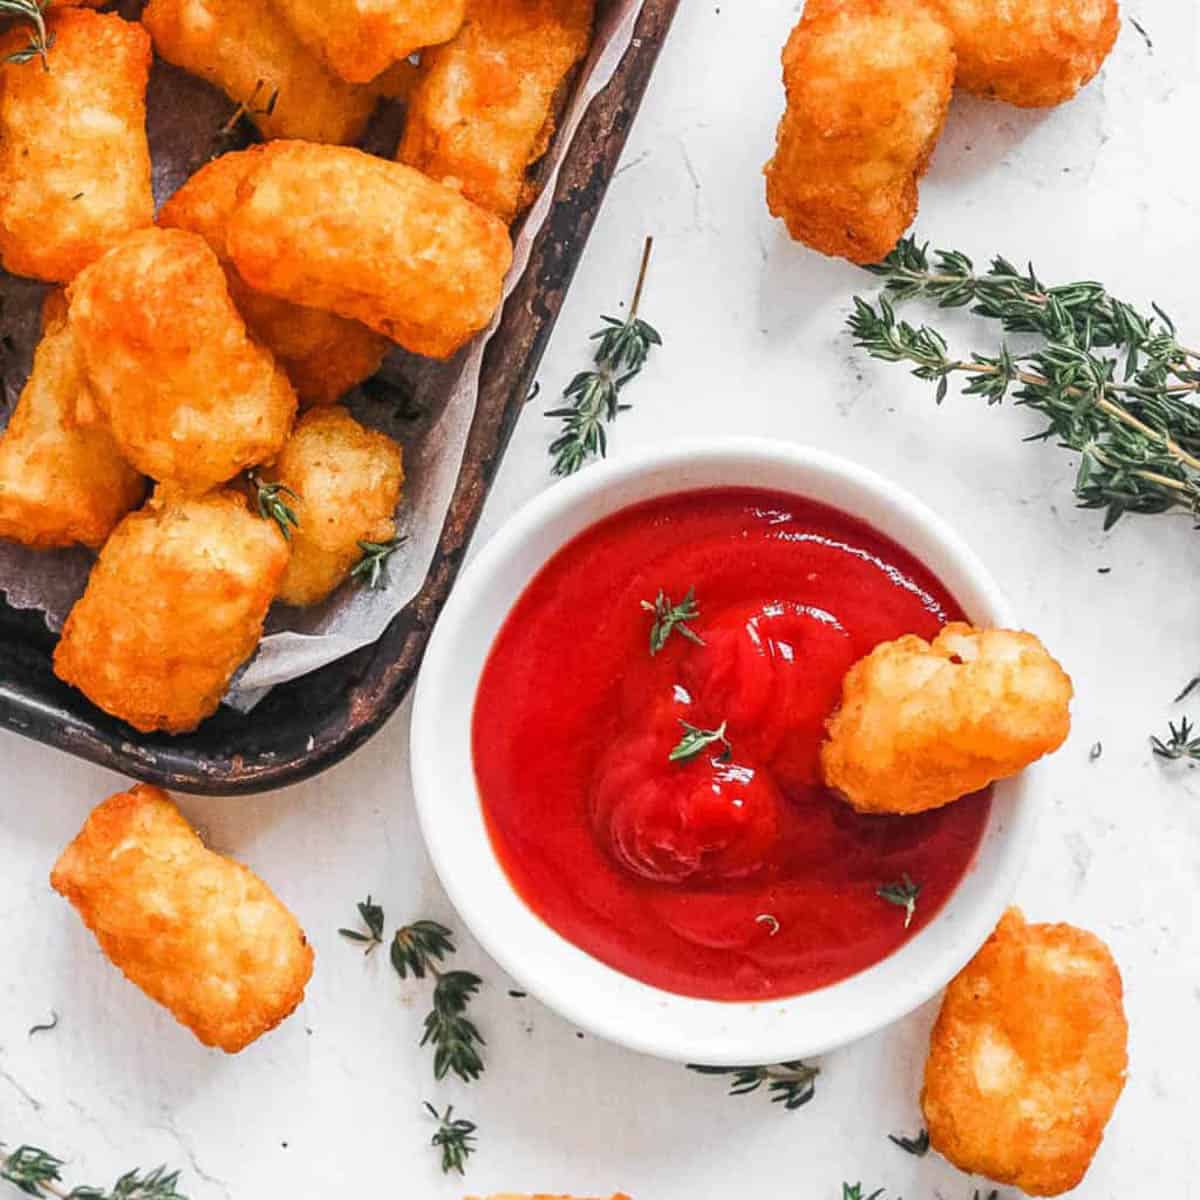 Air fryer tater tots served with ketchup on a white countertop.